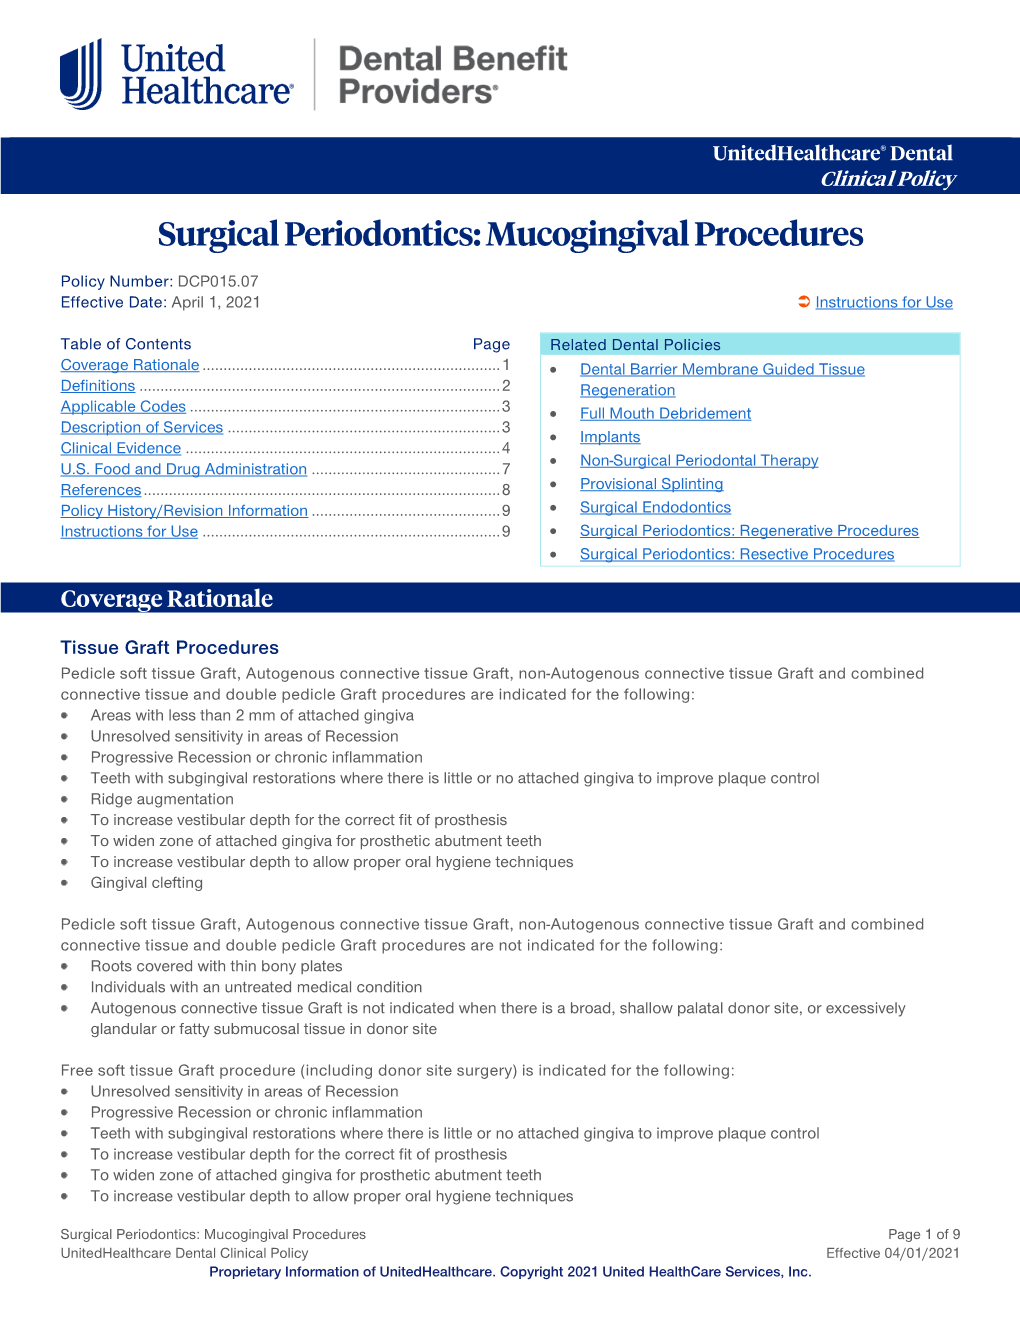 Surgical Periodontics: Mucogingival Procedures – Dental Clinical Policy